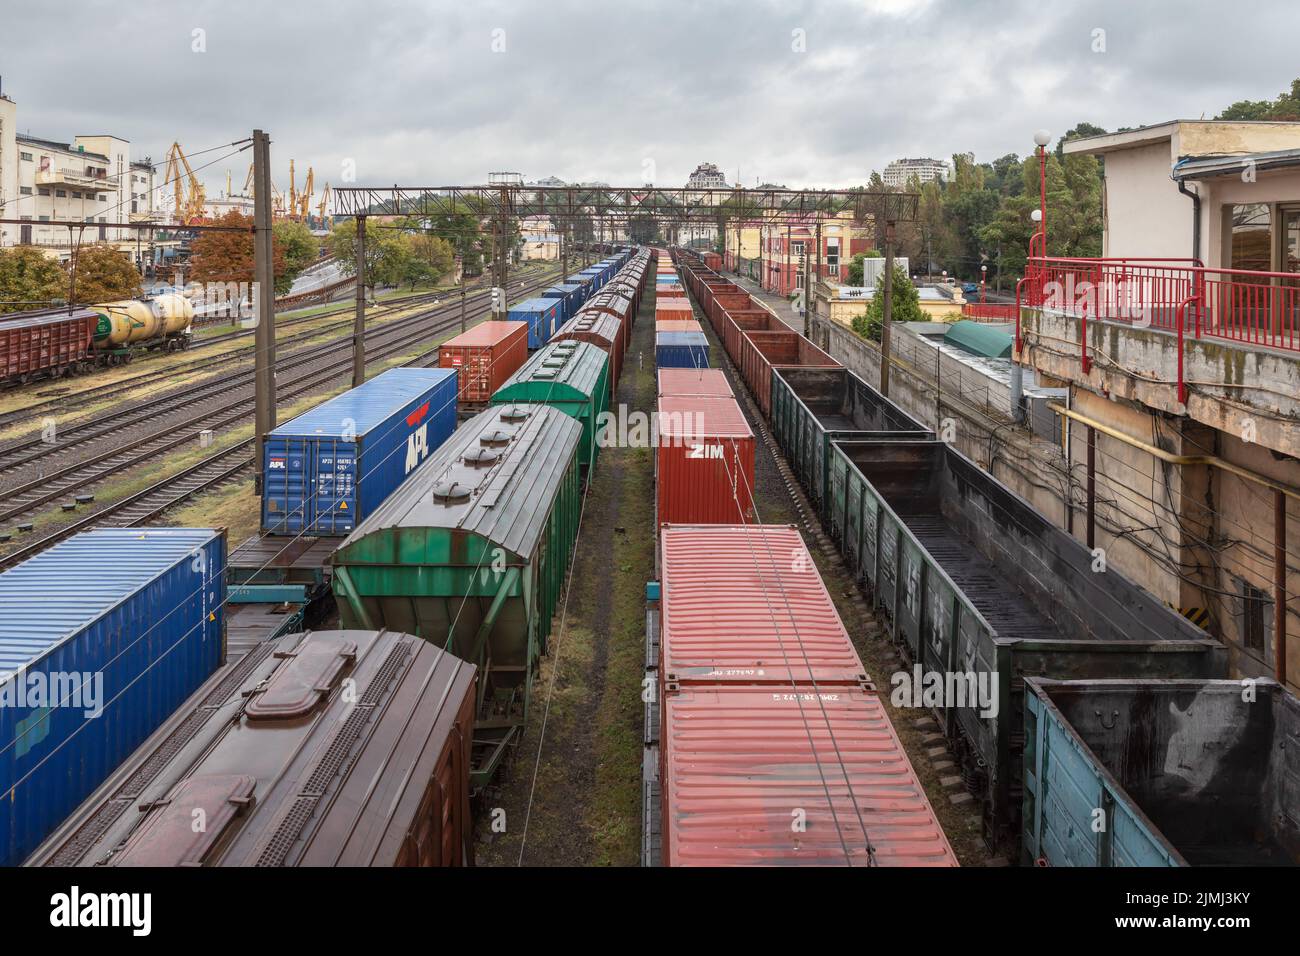 Odessa, Ukraine. 10th Sep, 2018. Railway cargo terminal seen at the Marine Industrial Commercial Port. For the first time since the beginning of the Russian war of aggression against Ukraine, a ship carrying grain has left the port of Odessa. This should make millions of tons of grain available again for the world market. Before the Russian war of aggression, Ukraine was one of the world's most important grain exporters. For them, billions in revenue from the sale of wheat and corn, among other commodities, is at stake. (Credit Image: © Mykhaylo Palinchak/SOPA Images via ZUMA Press Wire) Stock Photo